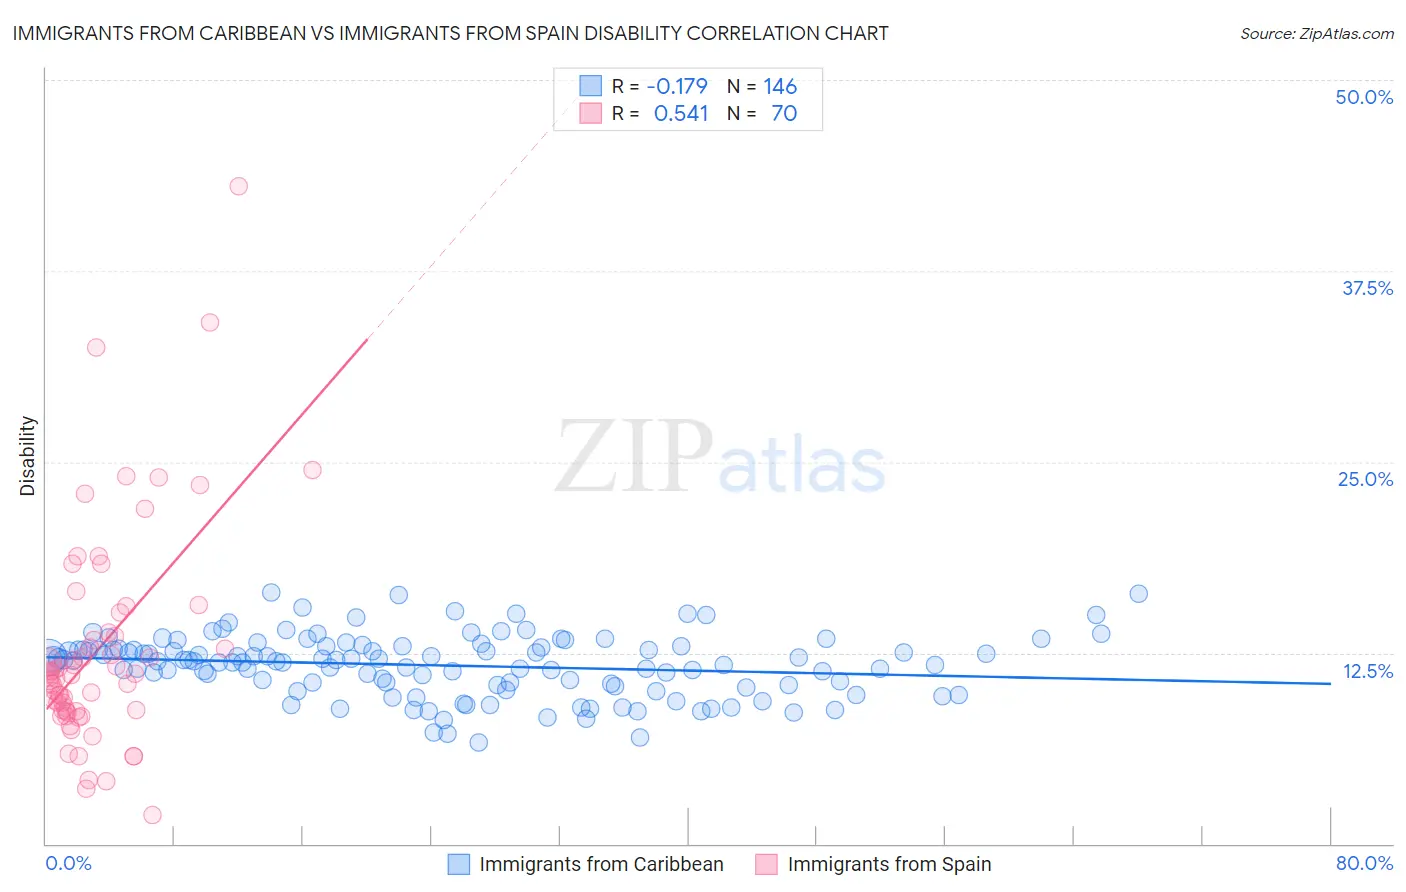 Immigrants from Caribbean vs Immigrants from Spain Disability